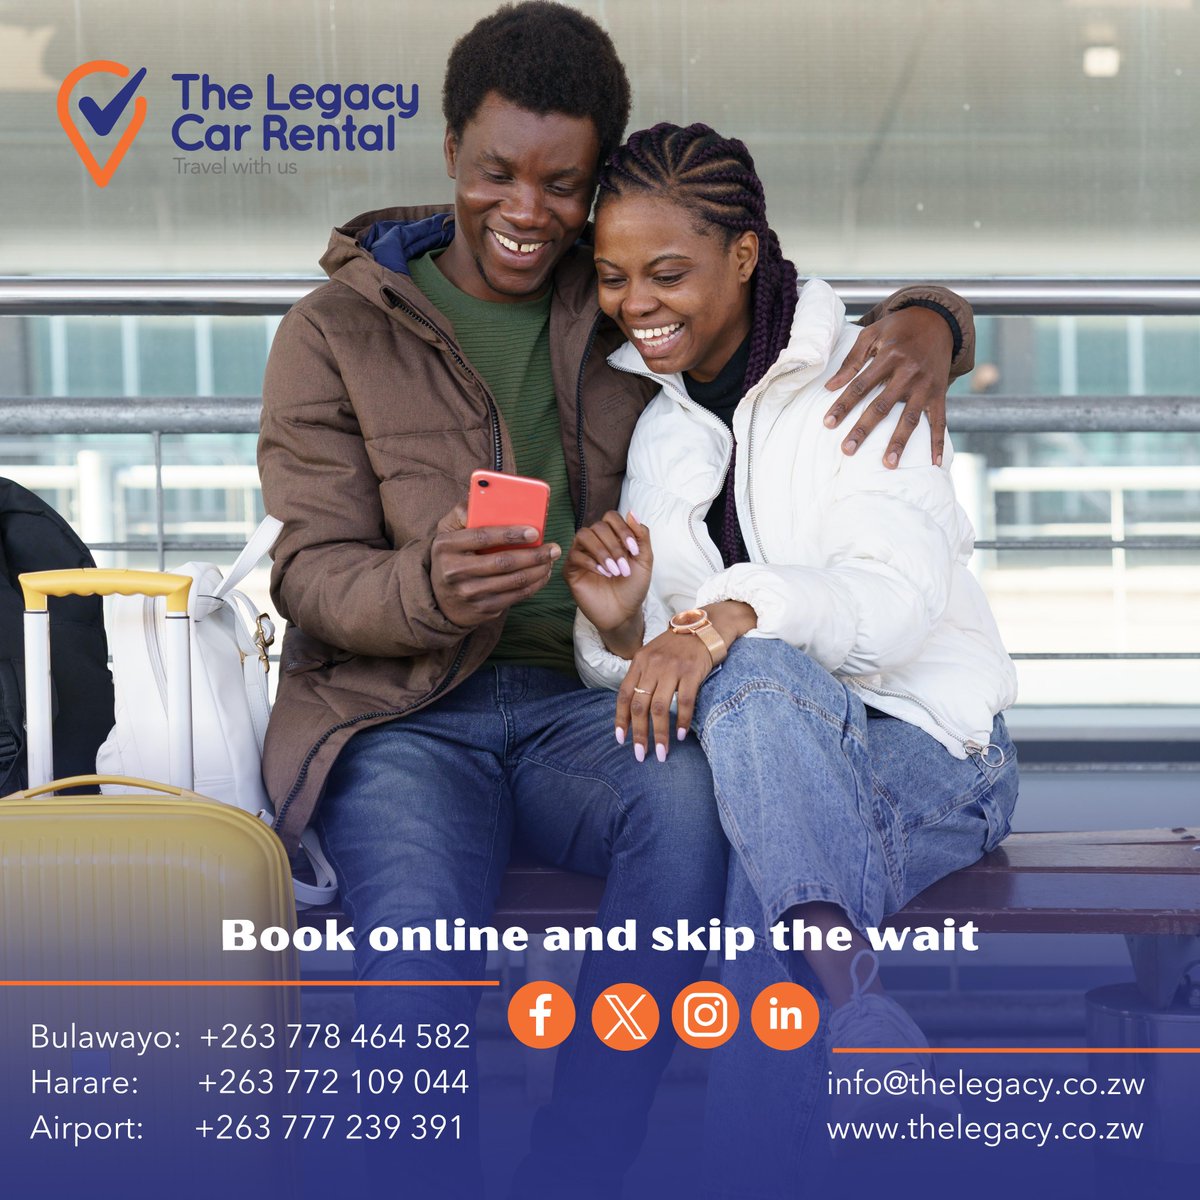 Book online and skip the wait. Travel with us today! #booknow #bookonline #convenient #travelwithus #TheLegacy